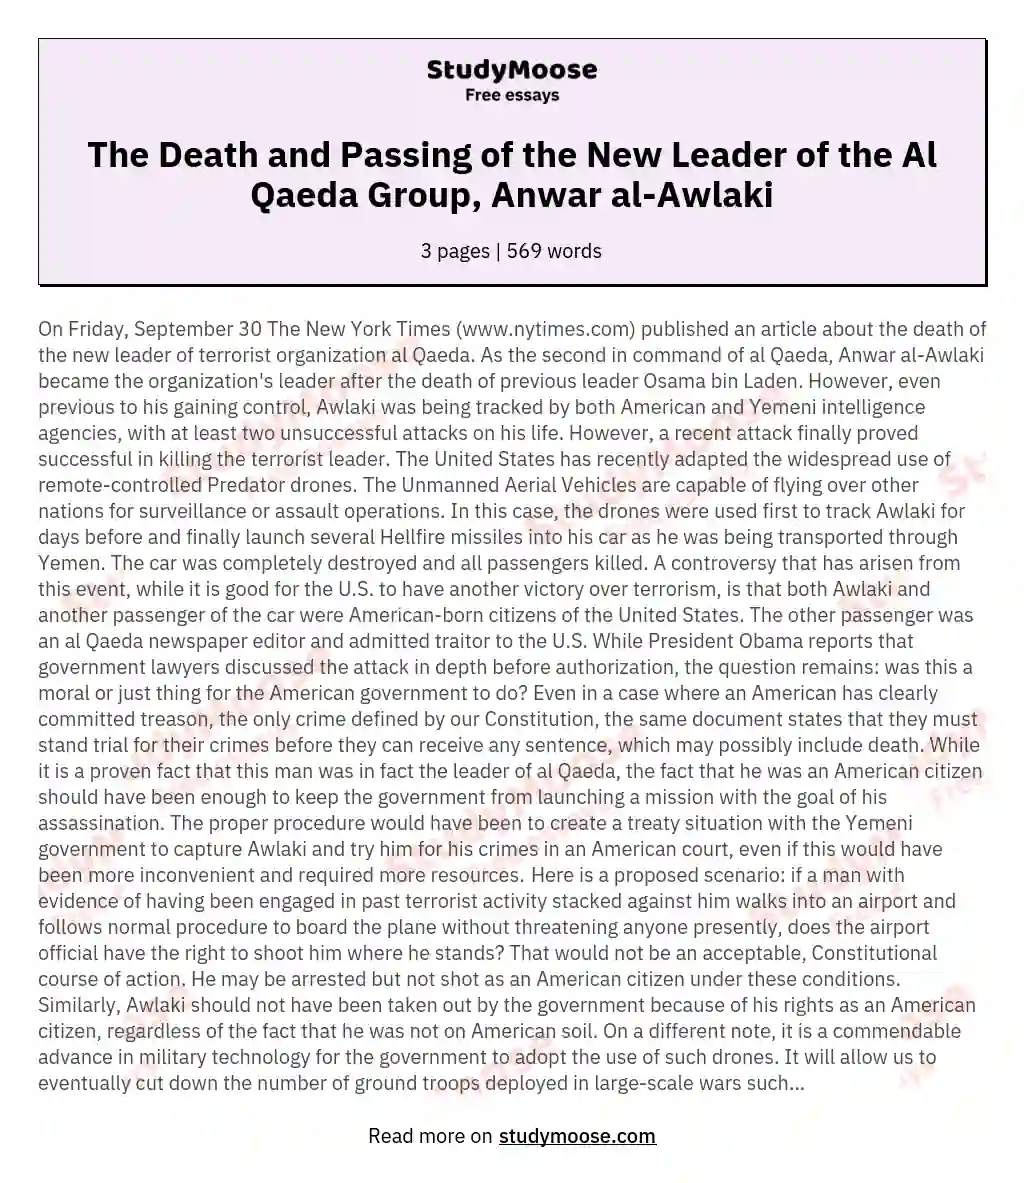 The Death and Passing of the New Leader of the Al Qaeda Group, Anwar al-Awlaki essay